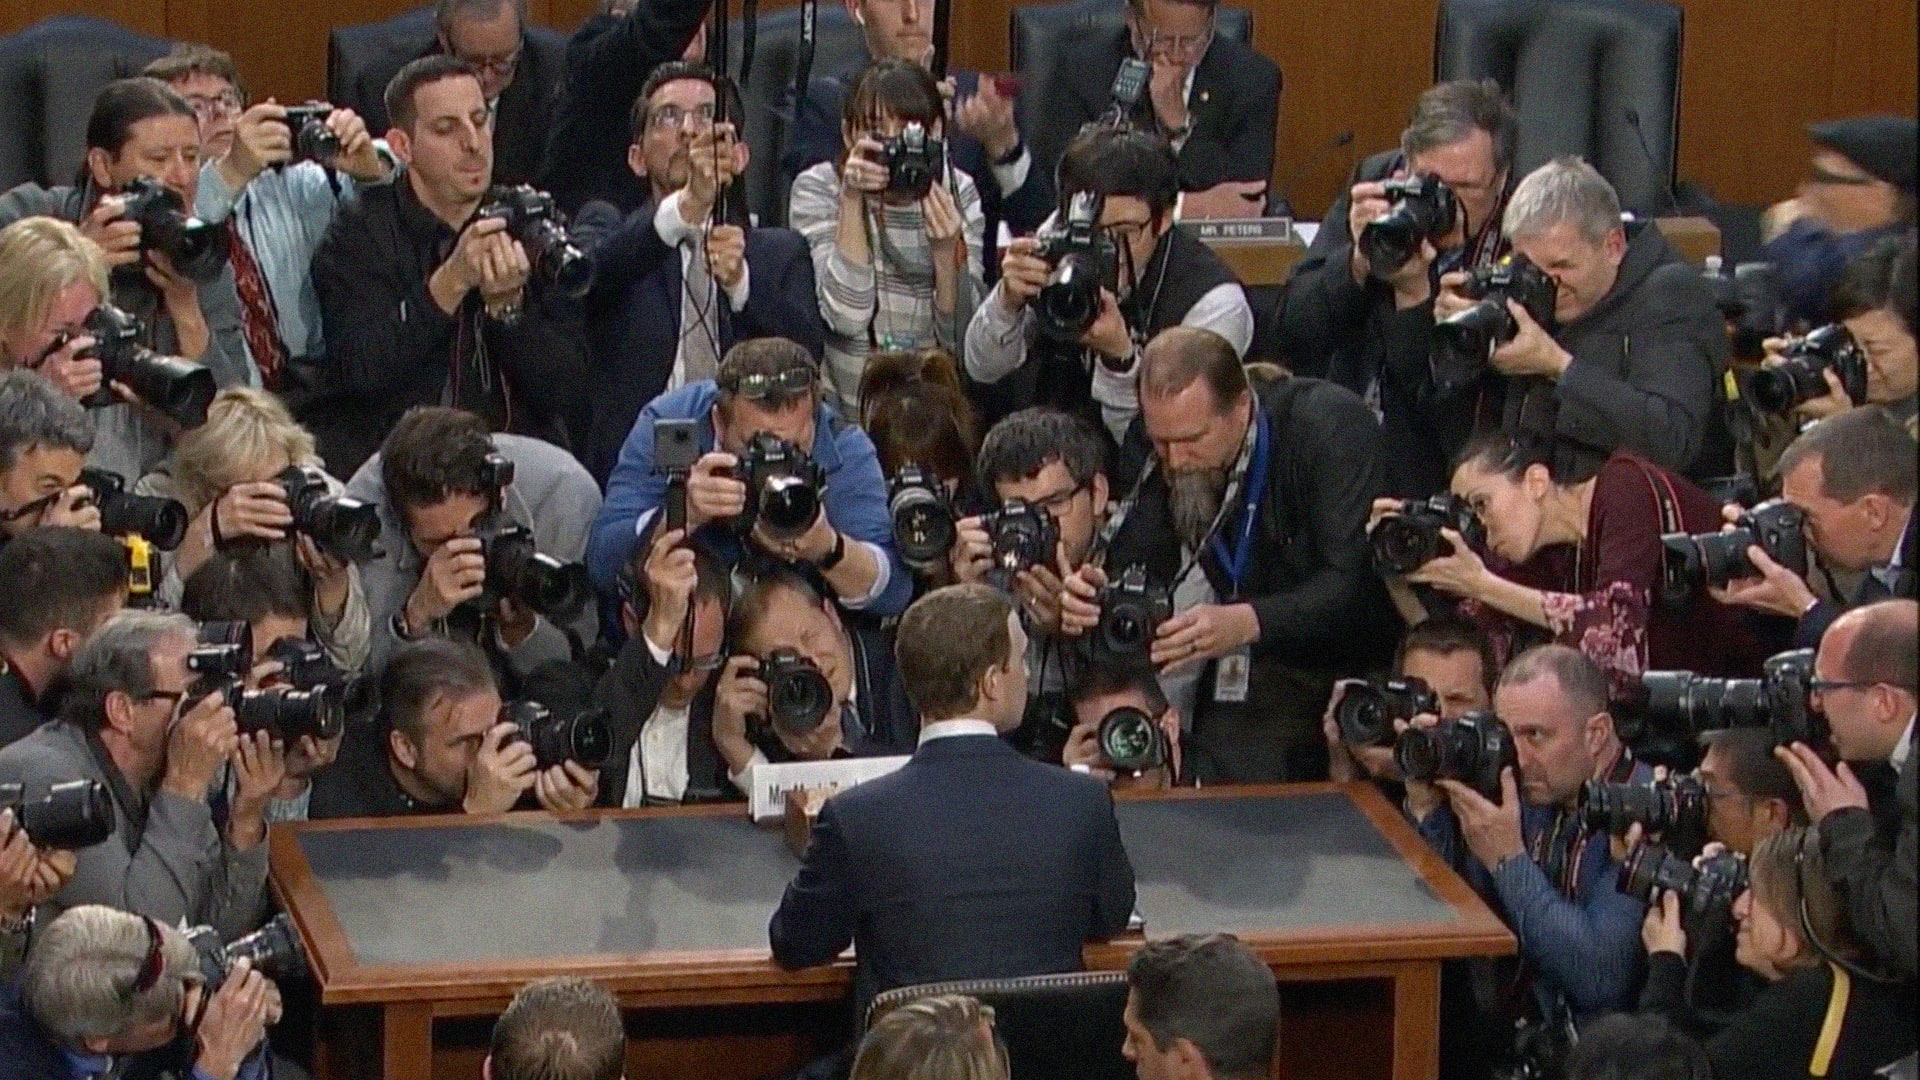 Zuckerberg testimony live stream: How to watch the Facebook CEO’s 2nd Congressional hearing